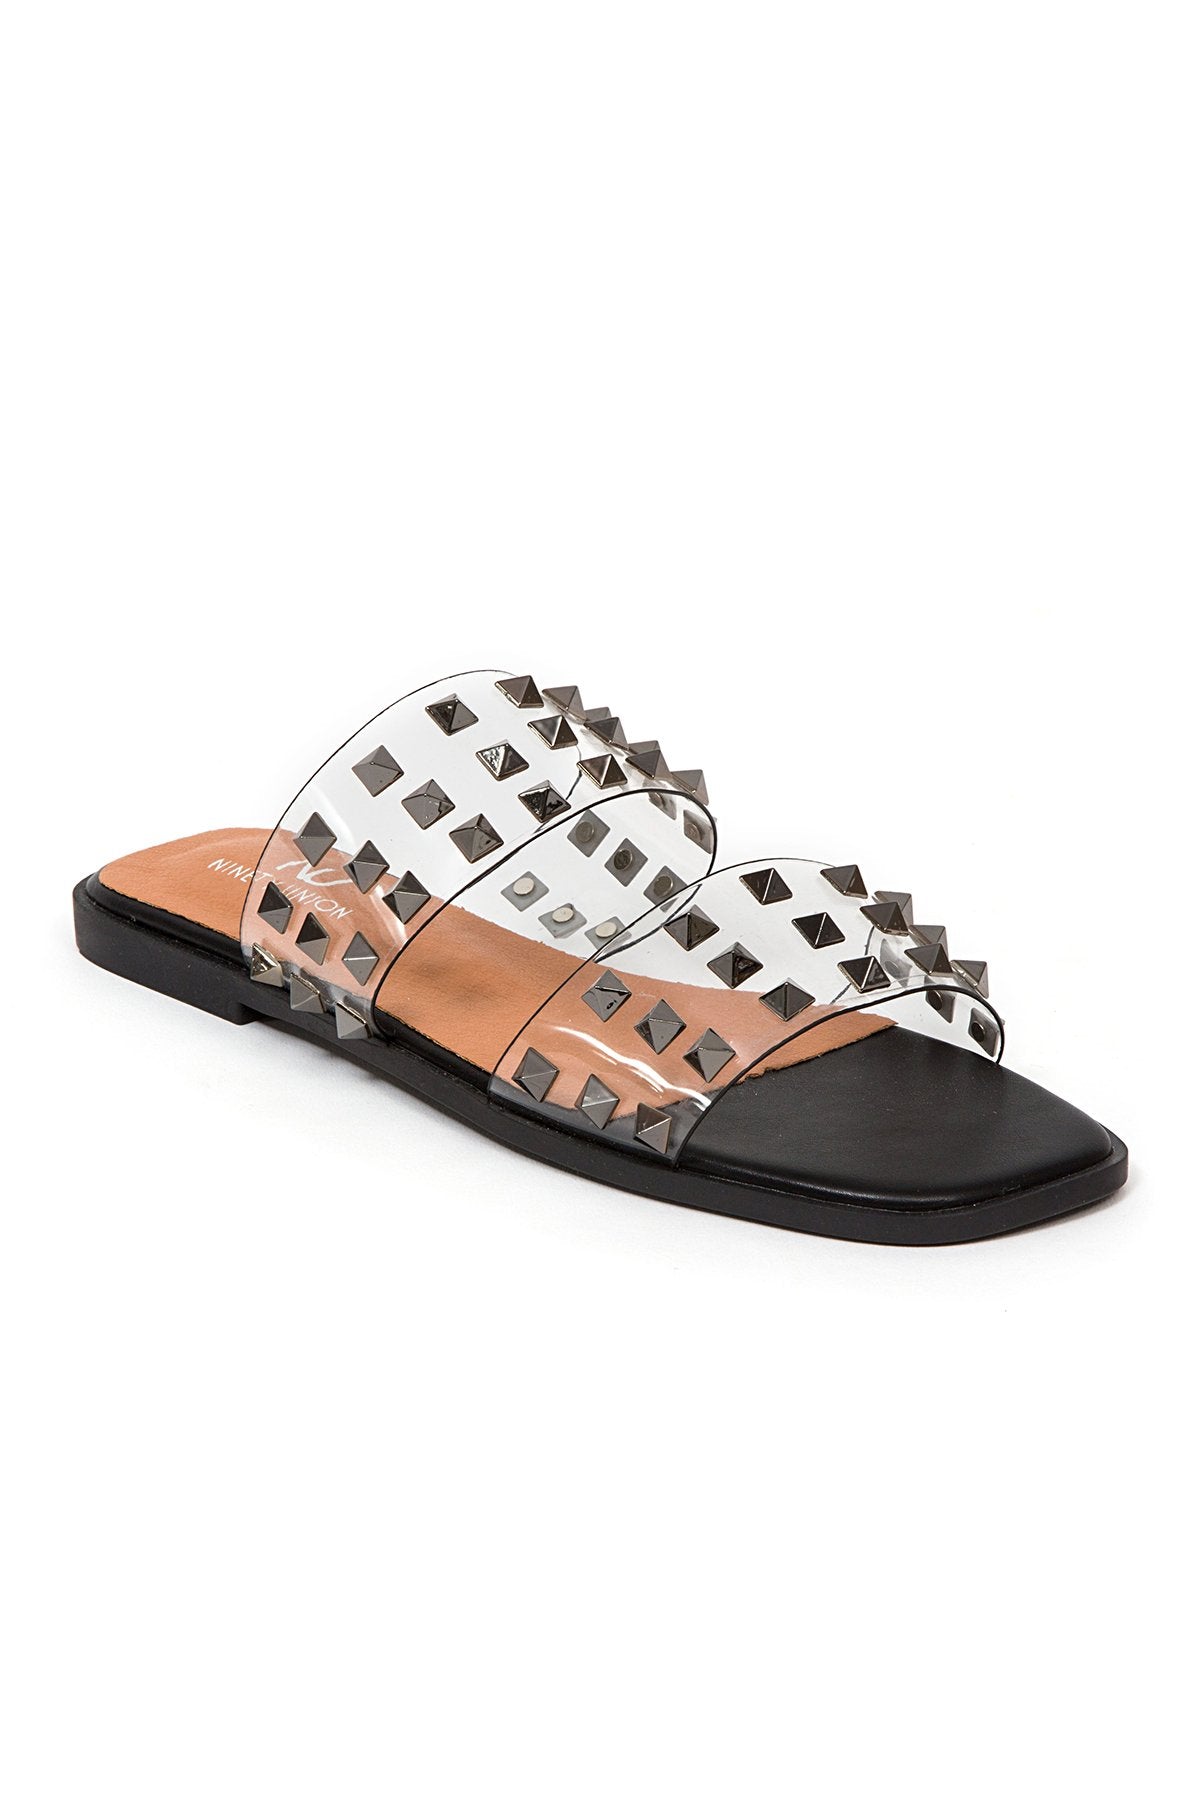 BLOOM STUDDED CLEAR SLIDE SANDAL SHOE LADY COUTURE 